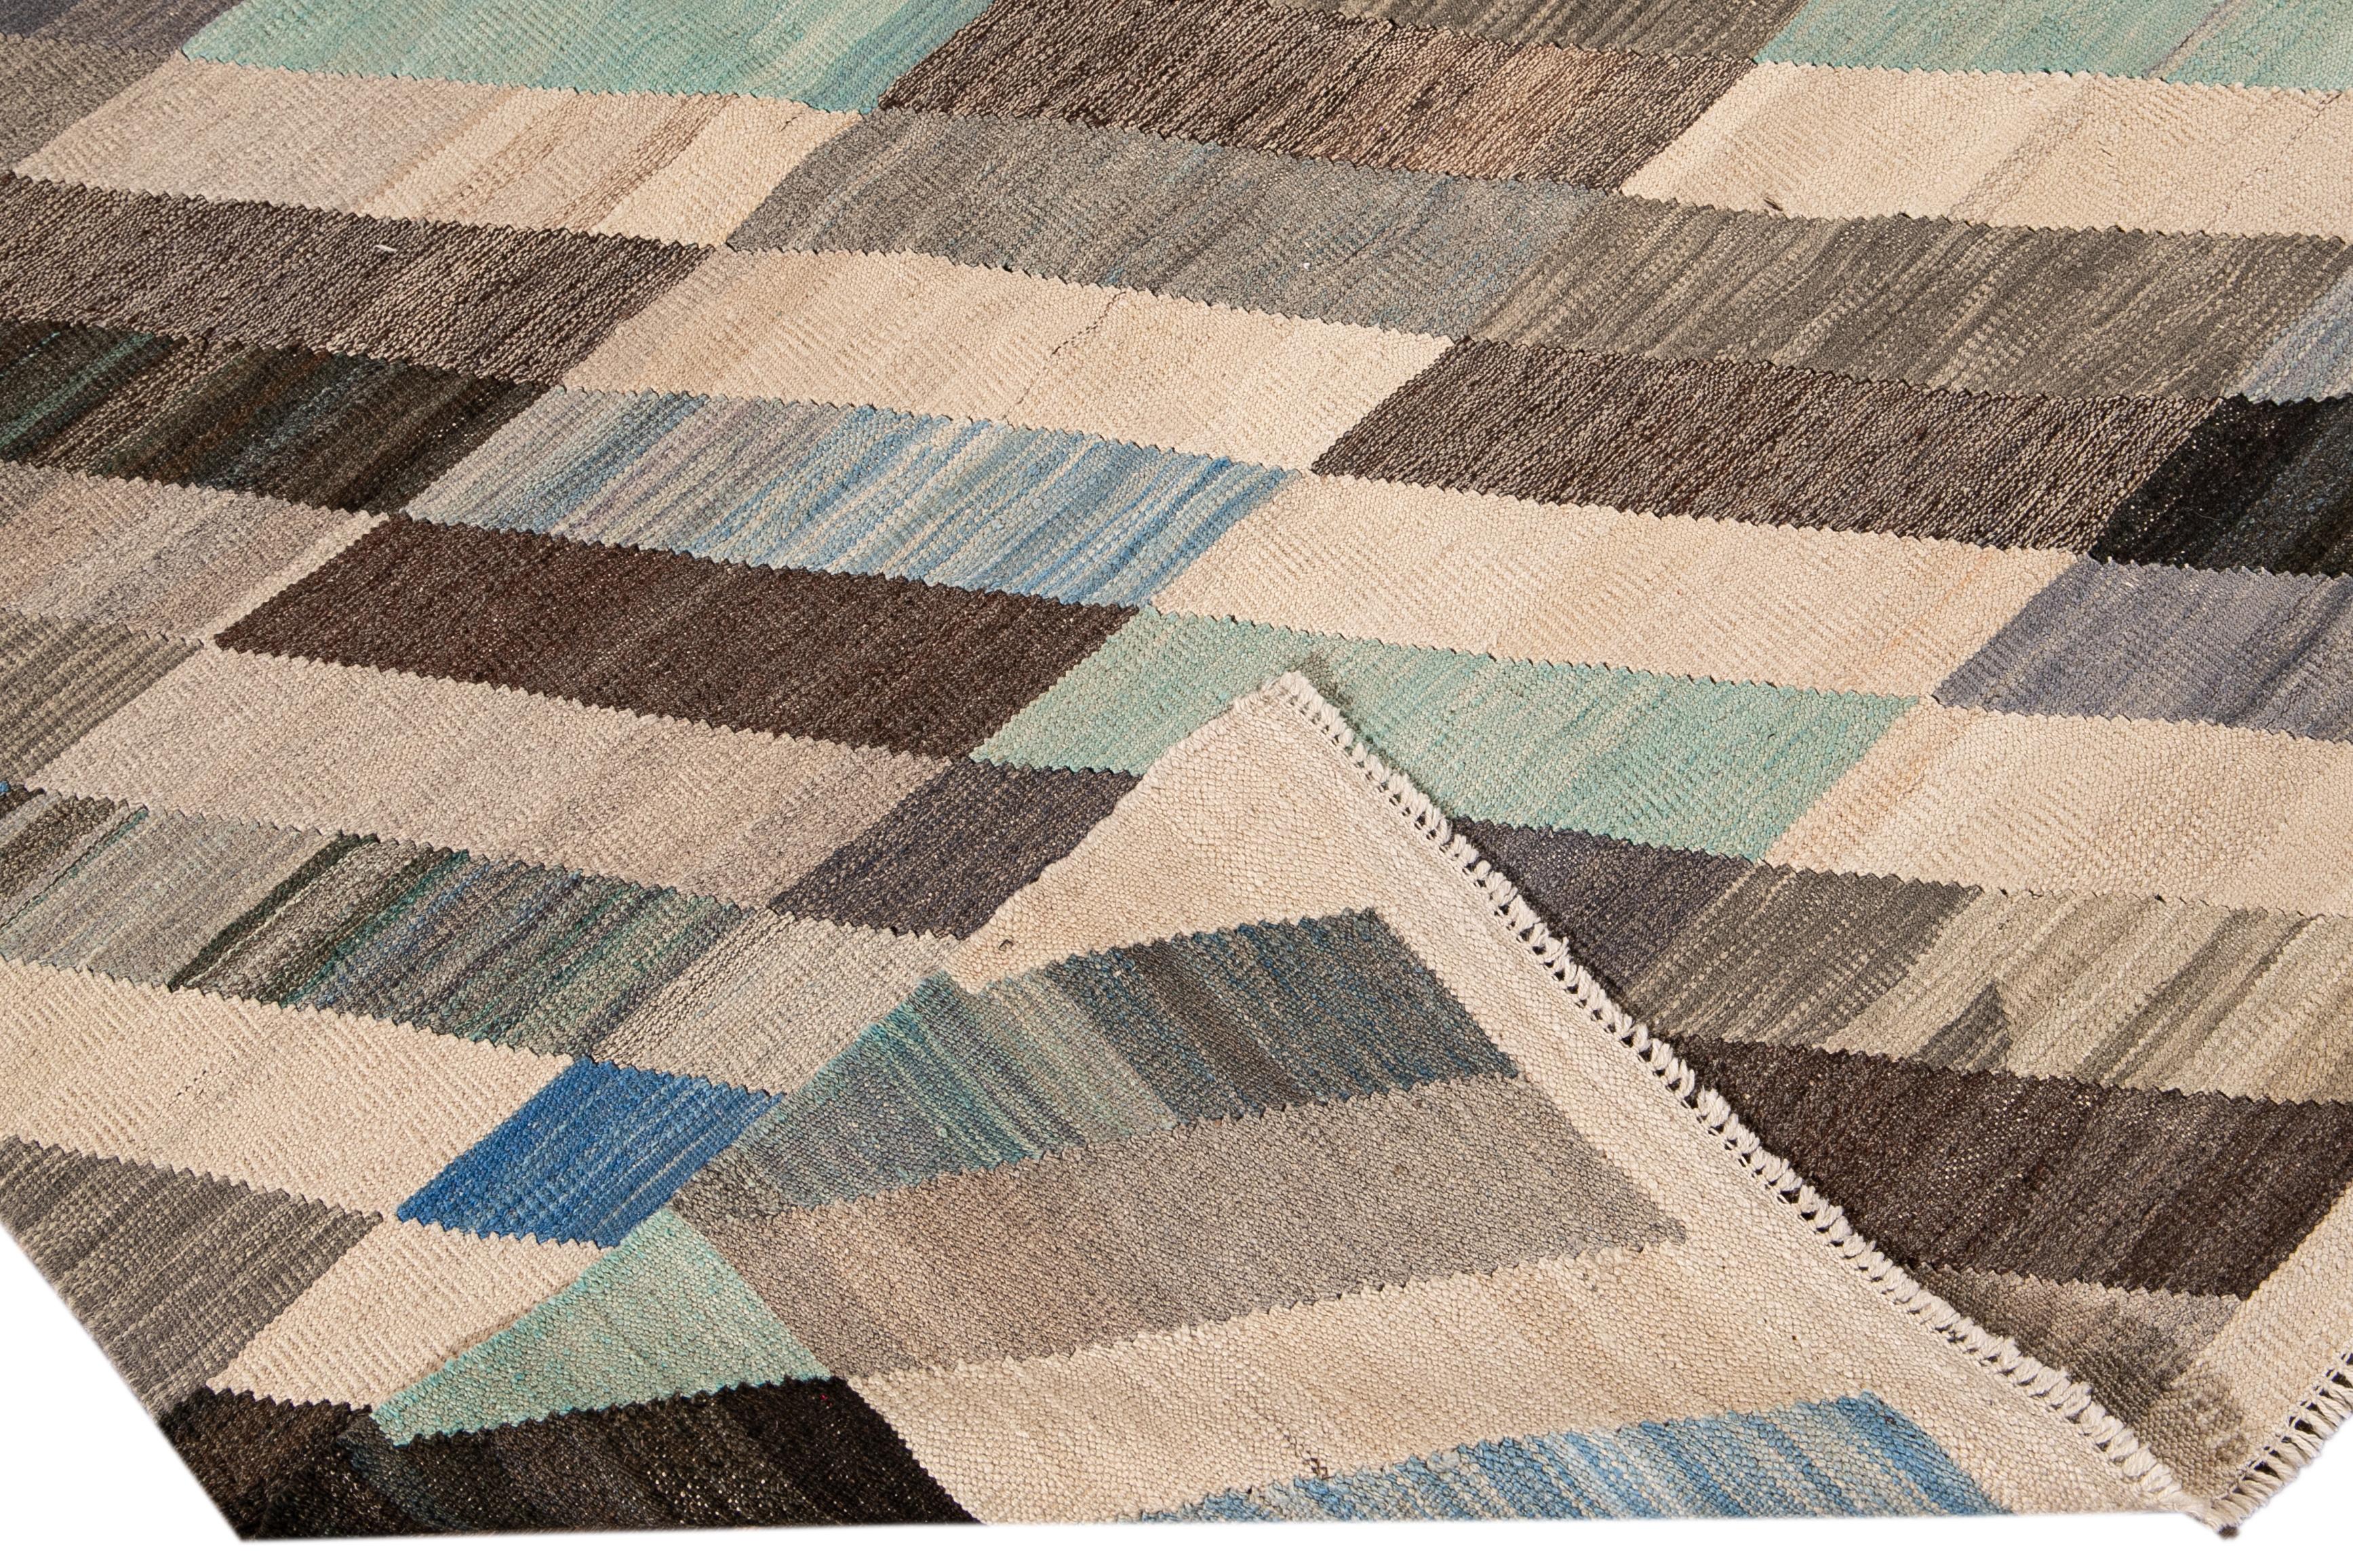 Beautiful modern Kilim flat-weave wool rug. This Kilim rug full of art has a brown, green, and blue field in a gorgeous geometric abstract design.

This rug measures: 8' x 11'6